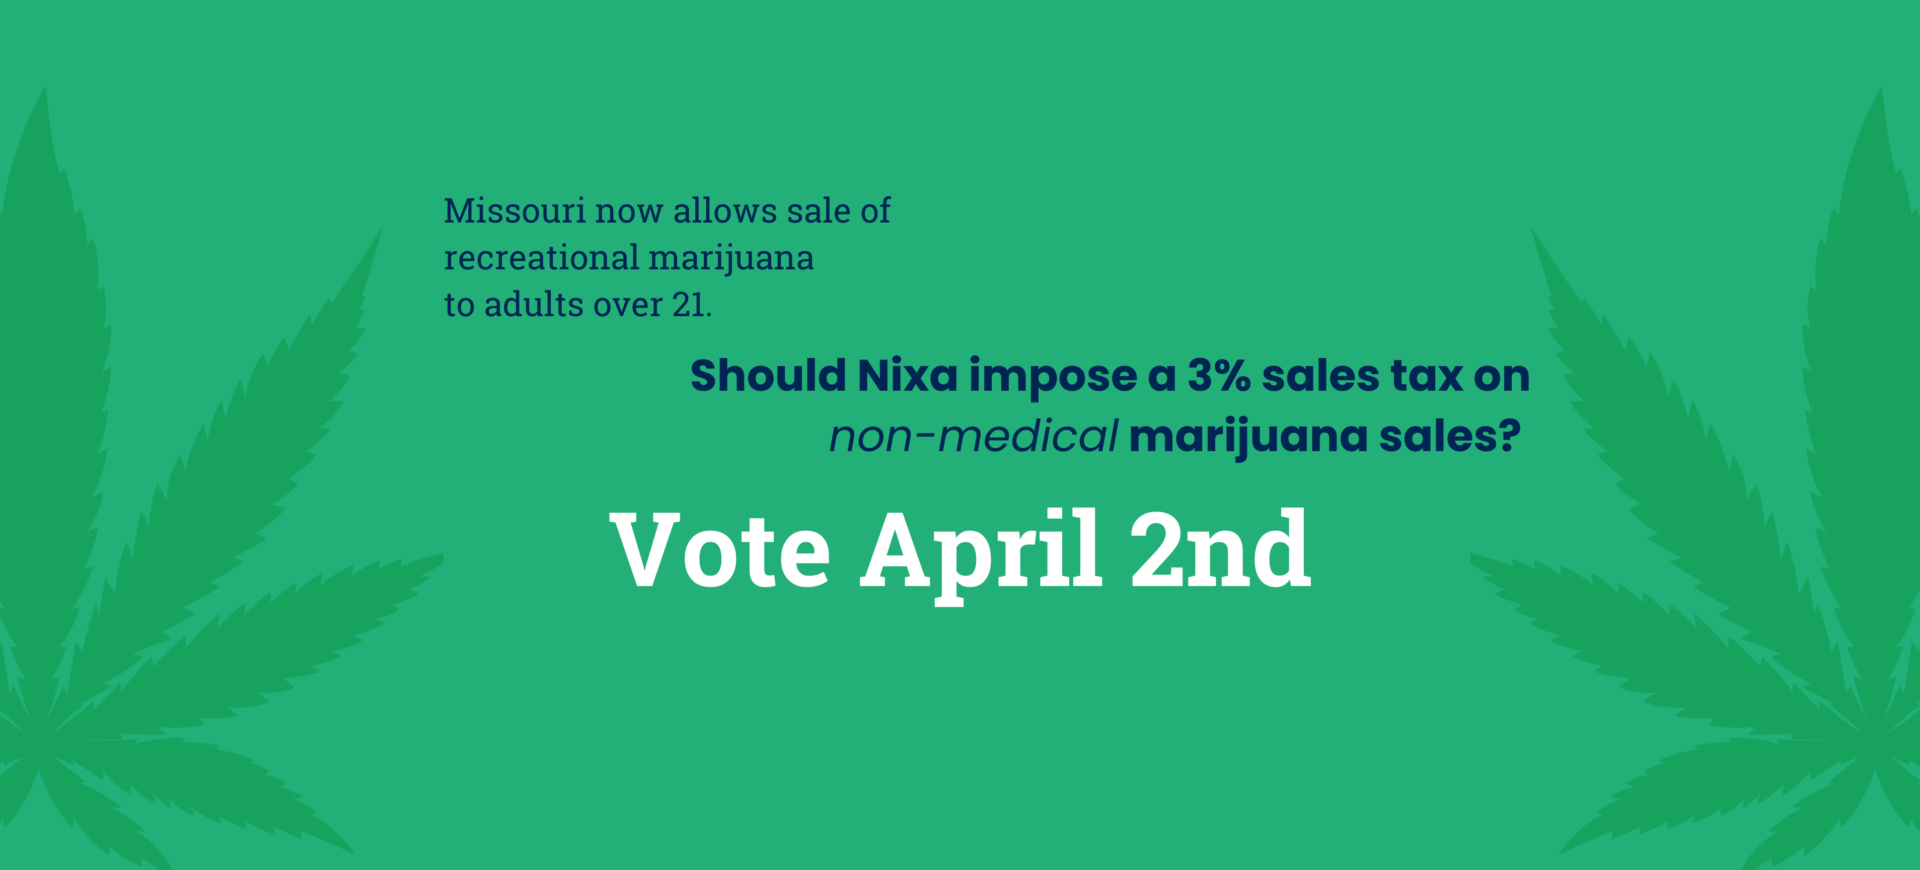 Vote April 2nd - Proposed sales tax on non-medical marijuana